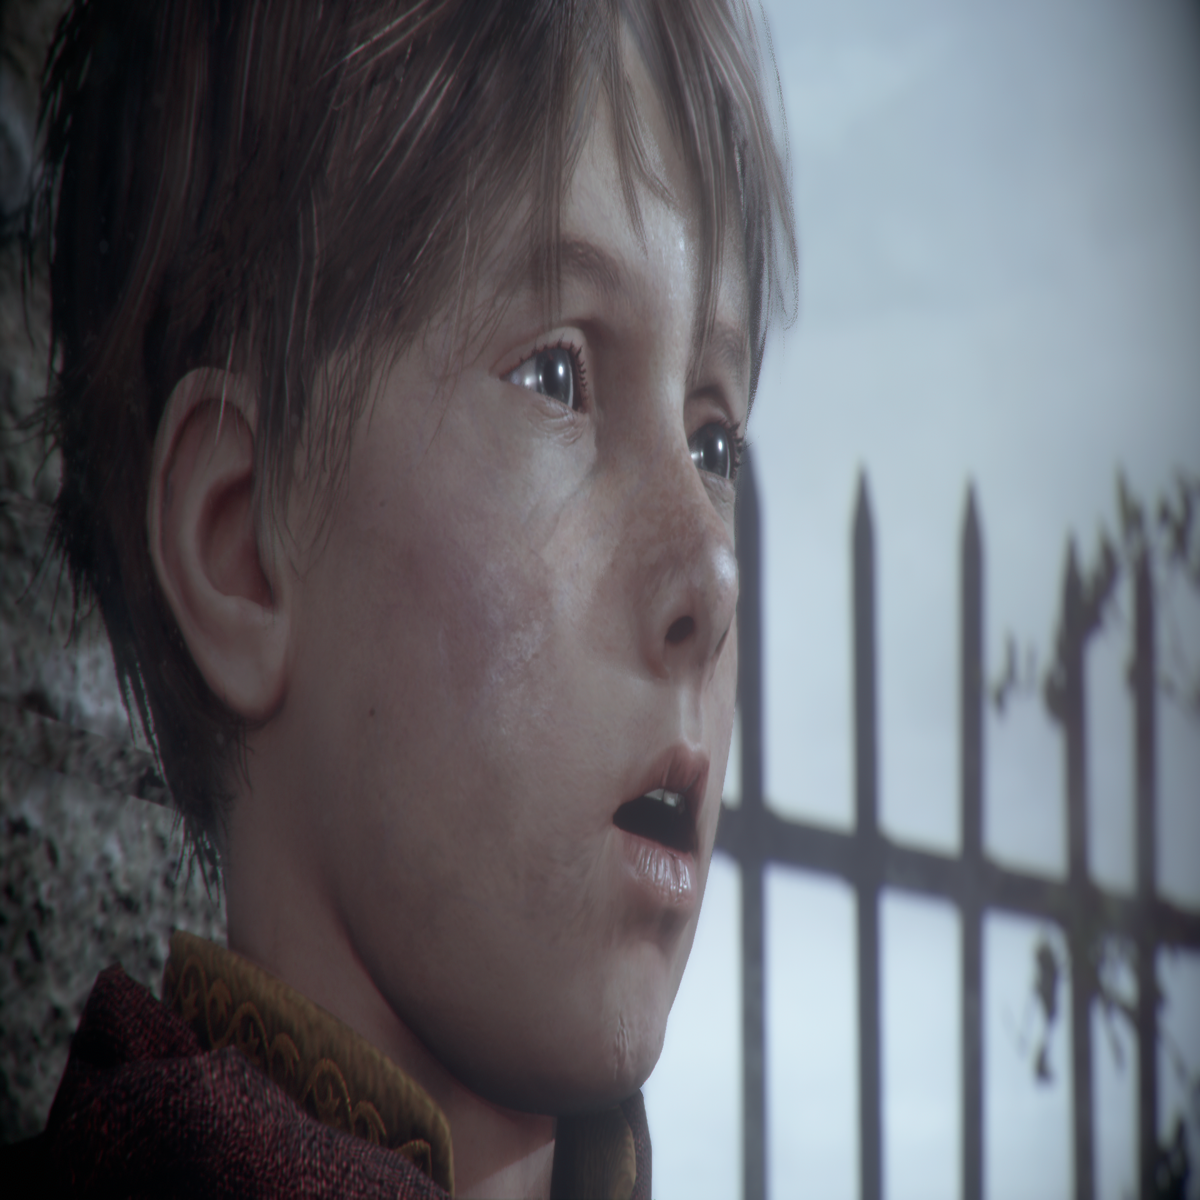 Game Review: A Plague Tale: Innocence - World History Encyclopedia